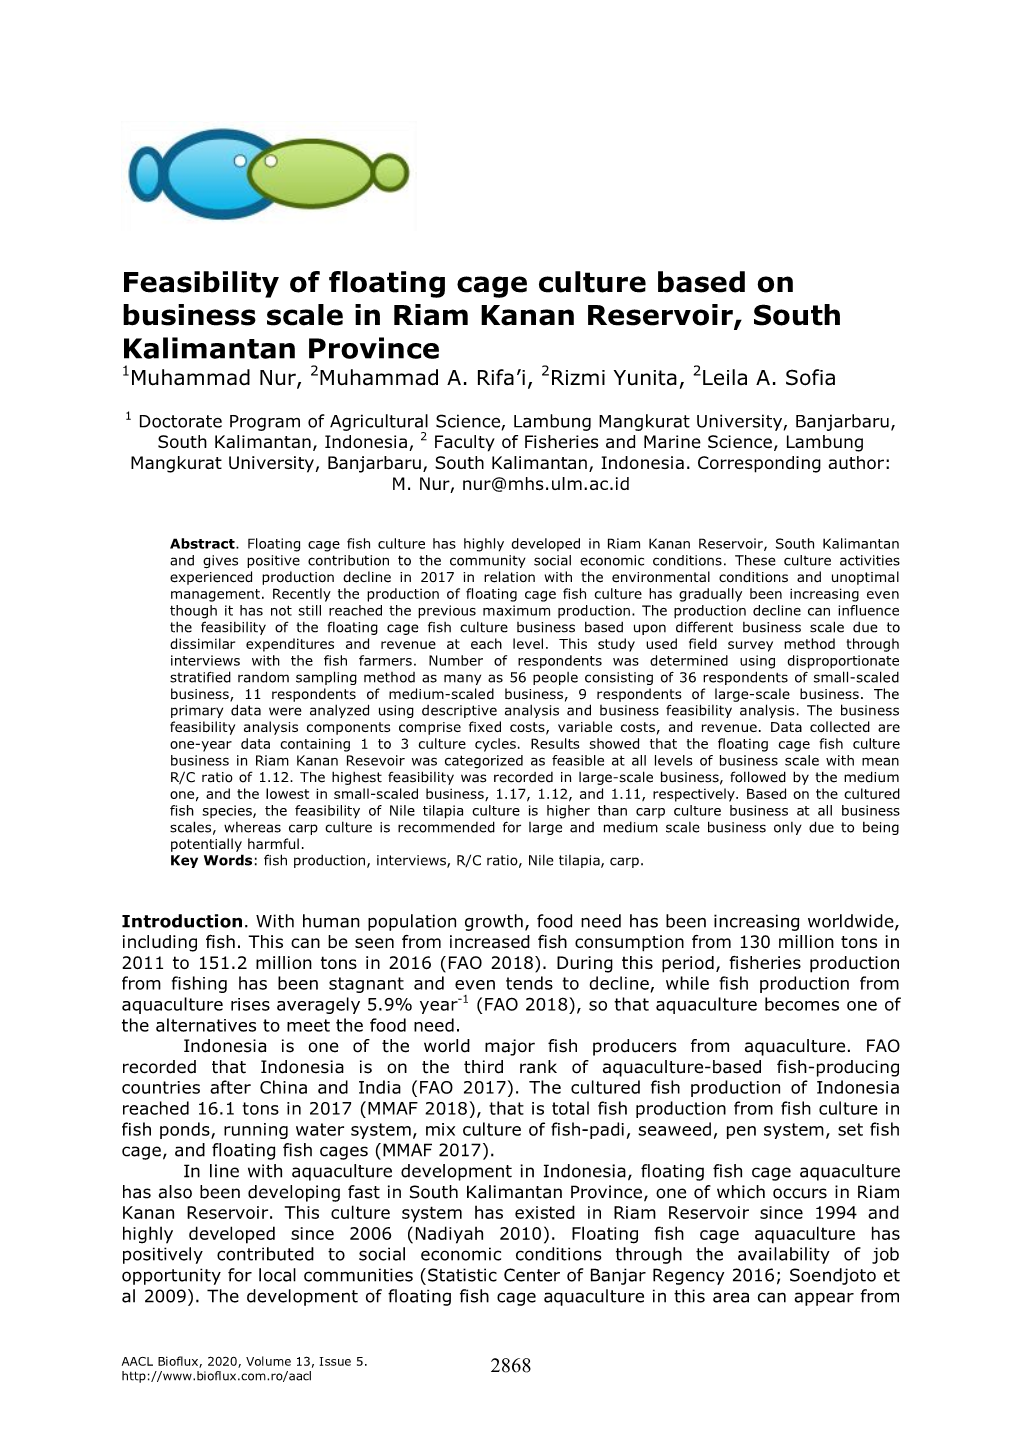 Feasibility of Floating Cage Culture Based on Business Scale in Riam Kanan Reservoir, South Kalimantan Province 1Muhammad Nur, 2Muhammad A